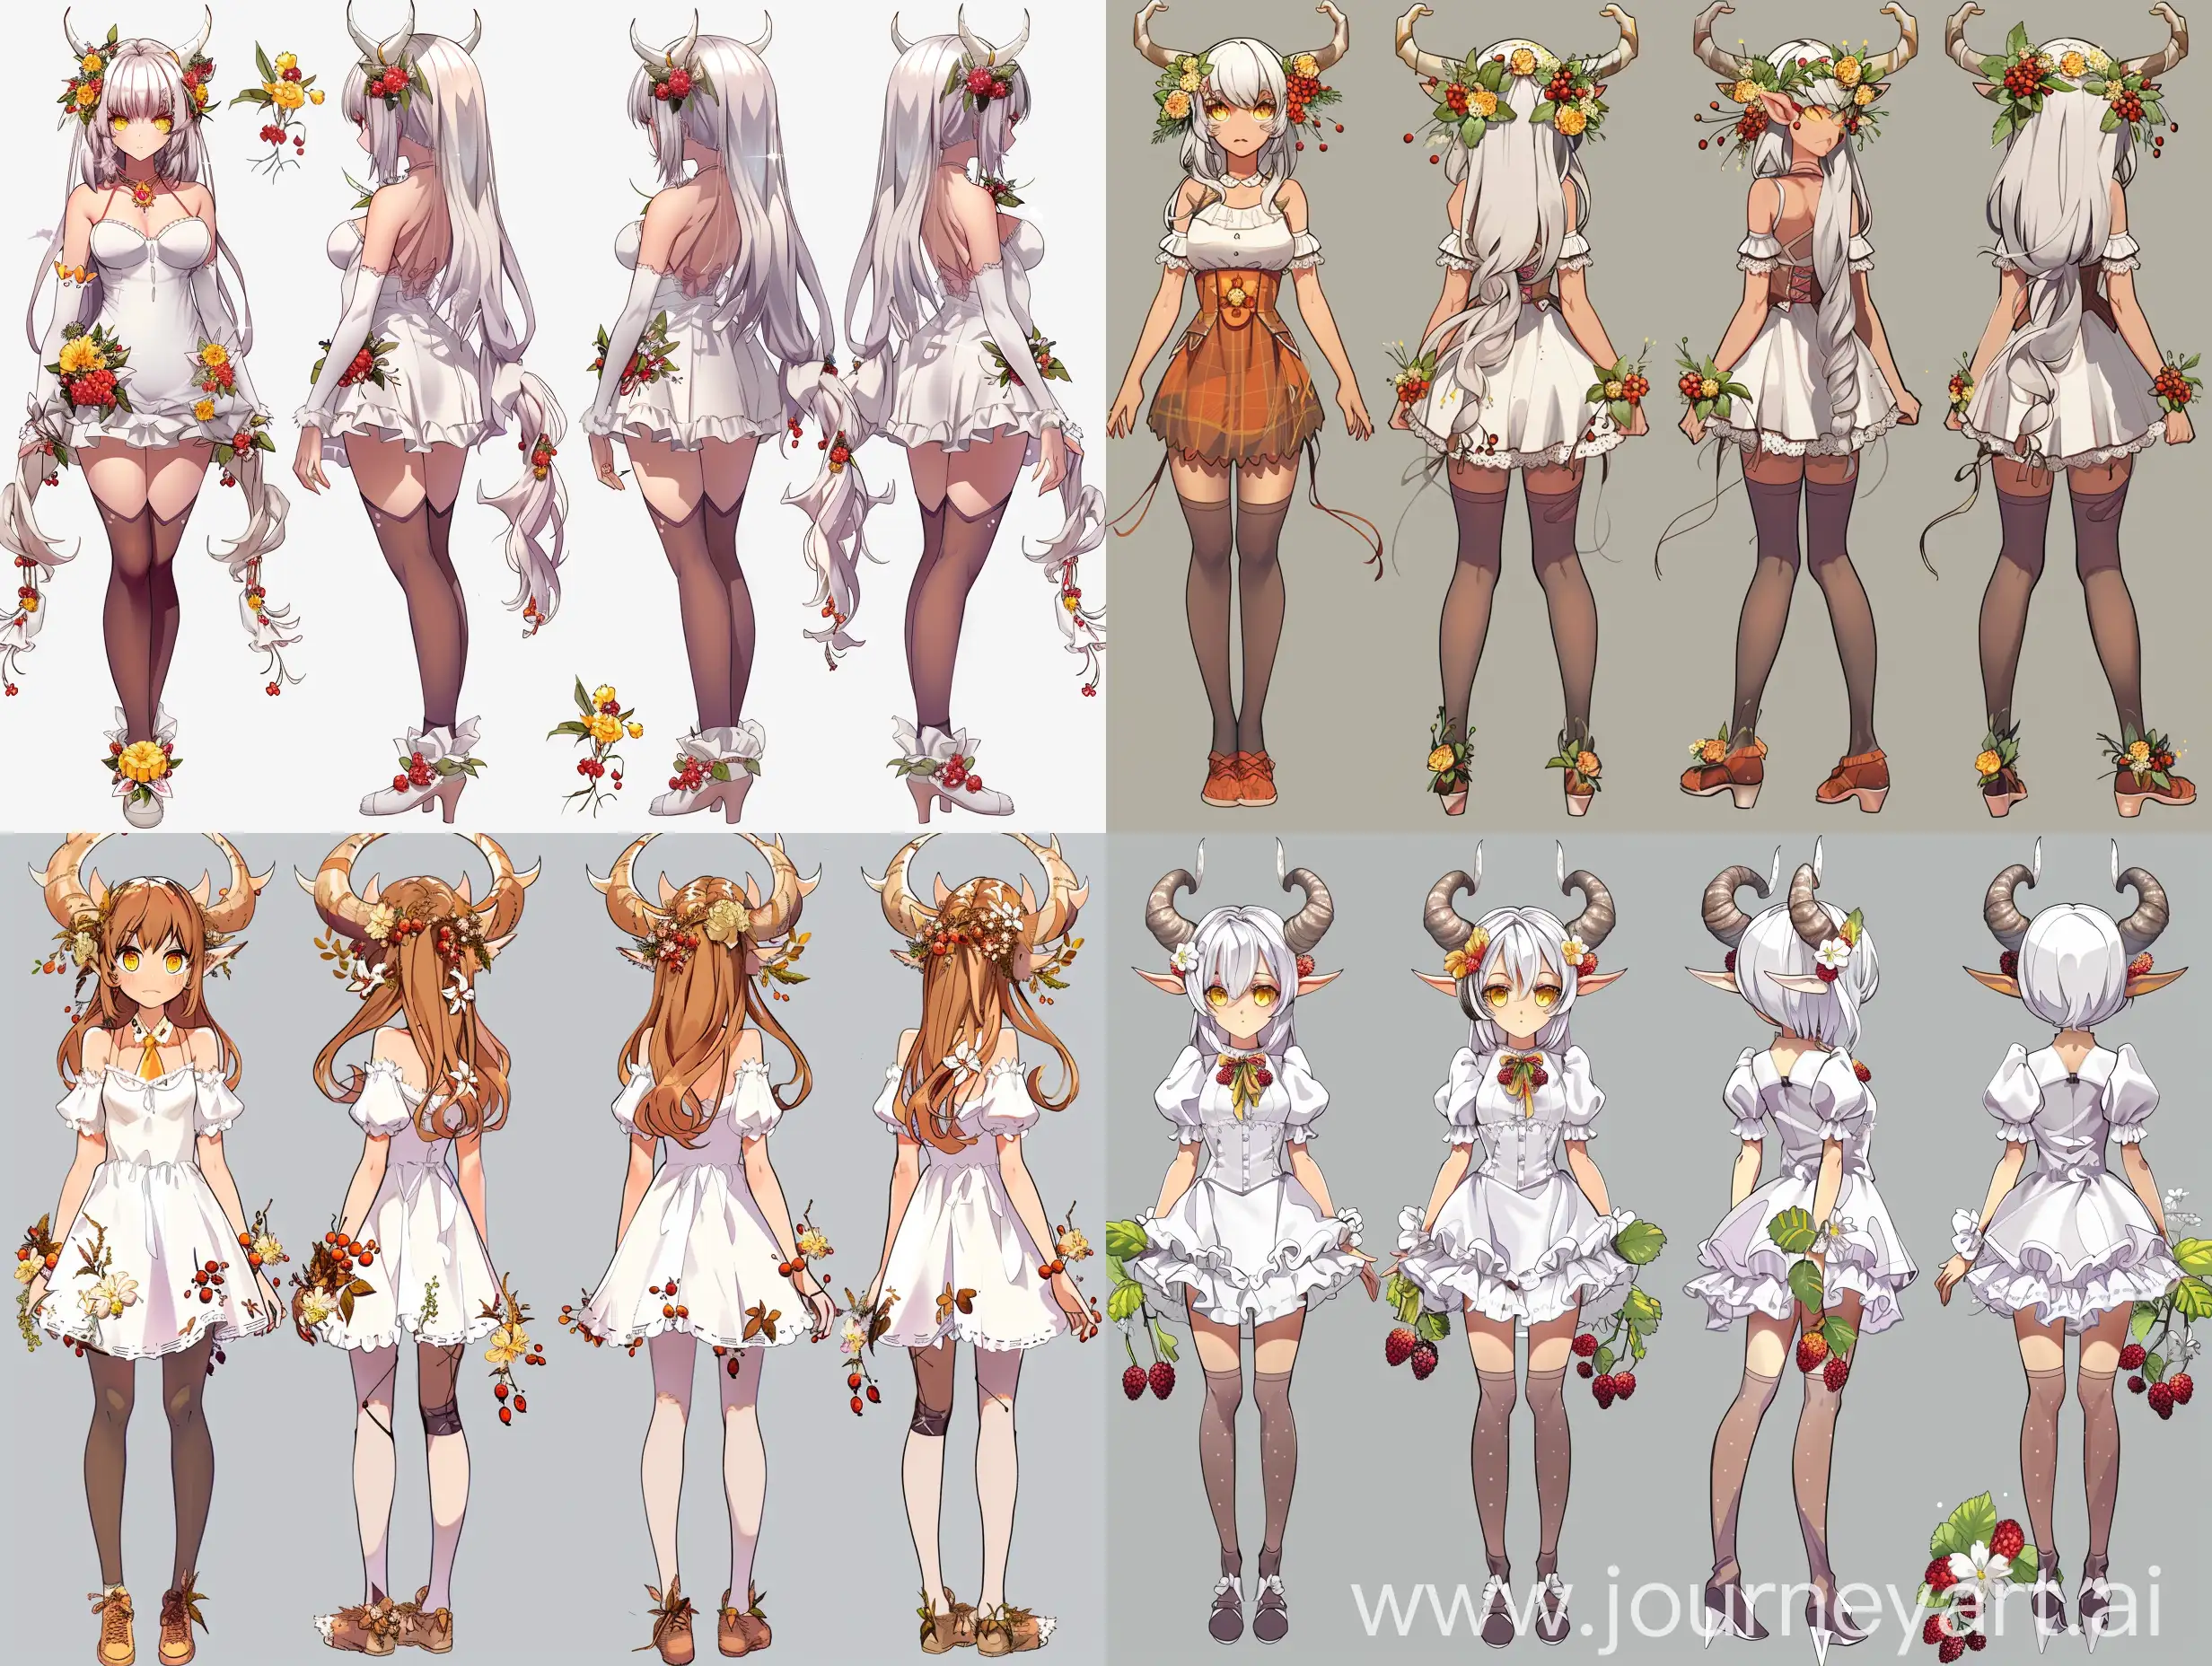 Fantasy-Anime-Girl-Character-Sheet-with-Horns-Berries-Flowers-and-Airy-Dress